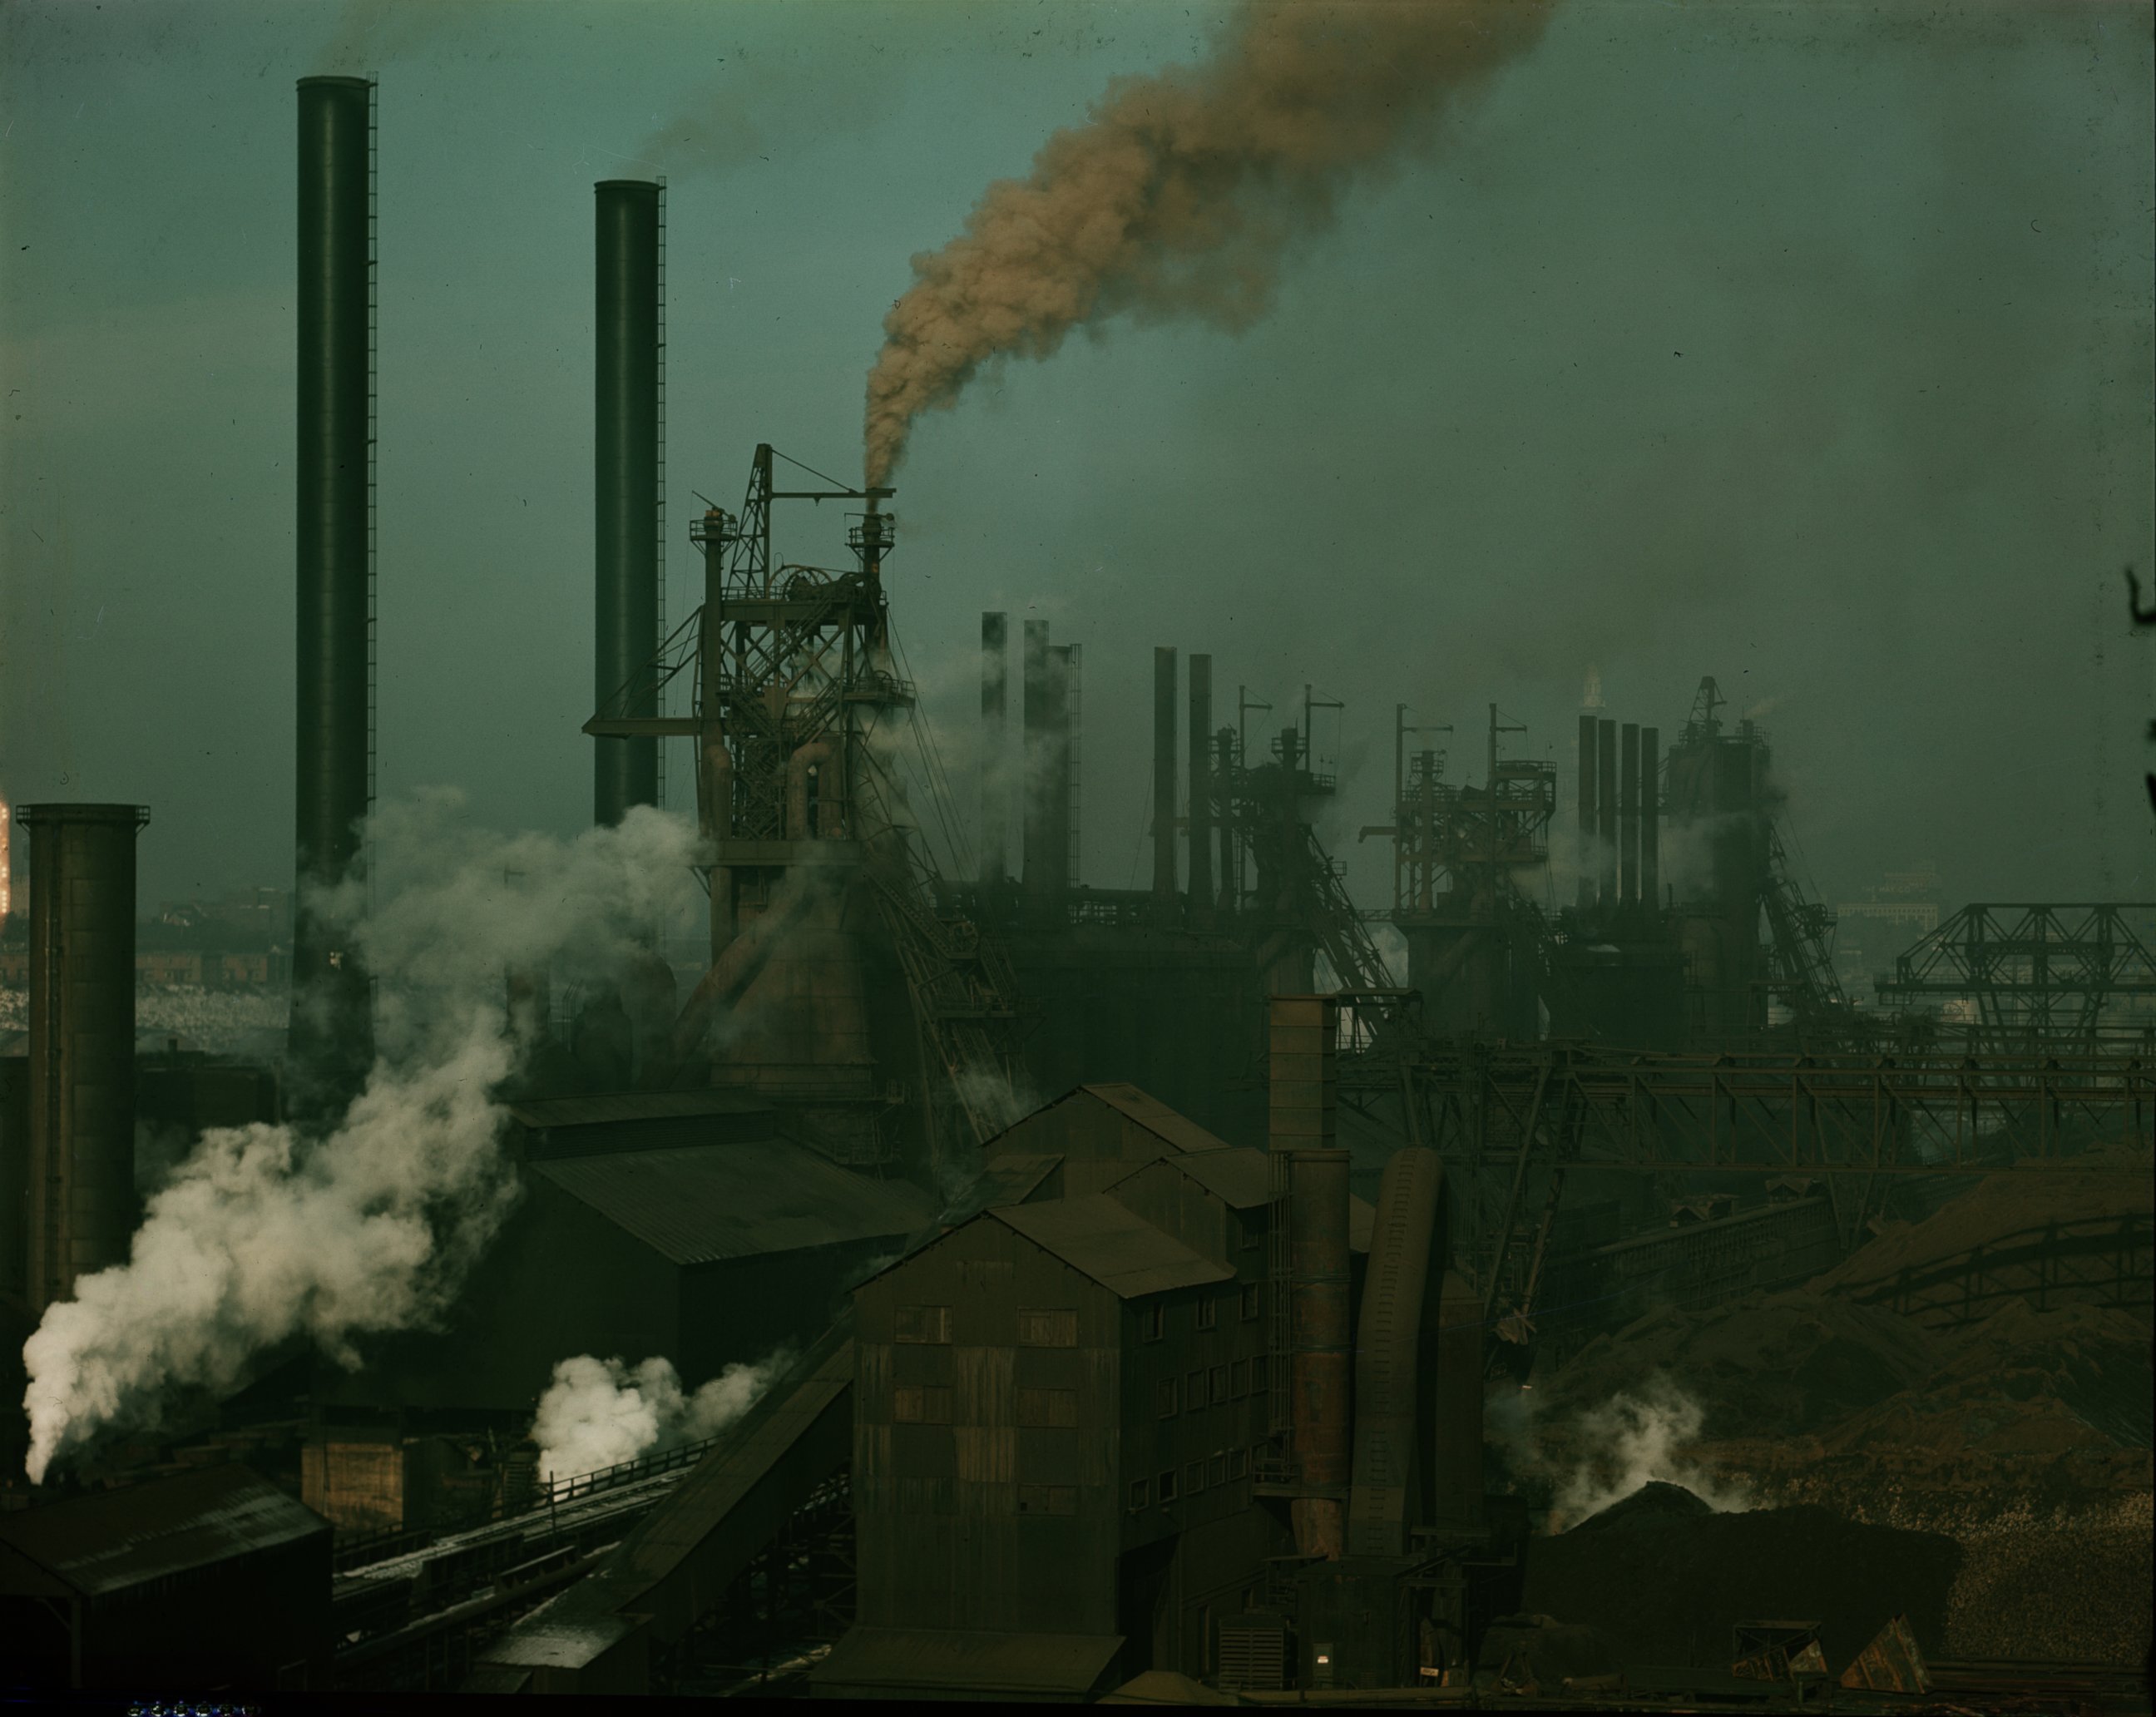 PHOTO: The blast furnace section of the Cleveland Works of the Republic Steel Corporation is pictured in Cleveland, Ohio, cira 1949.